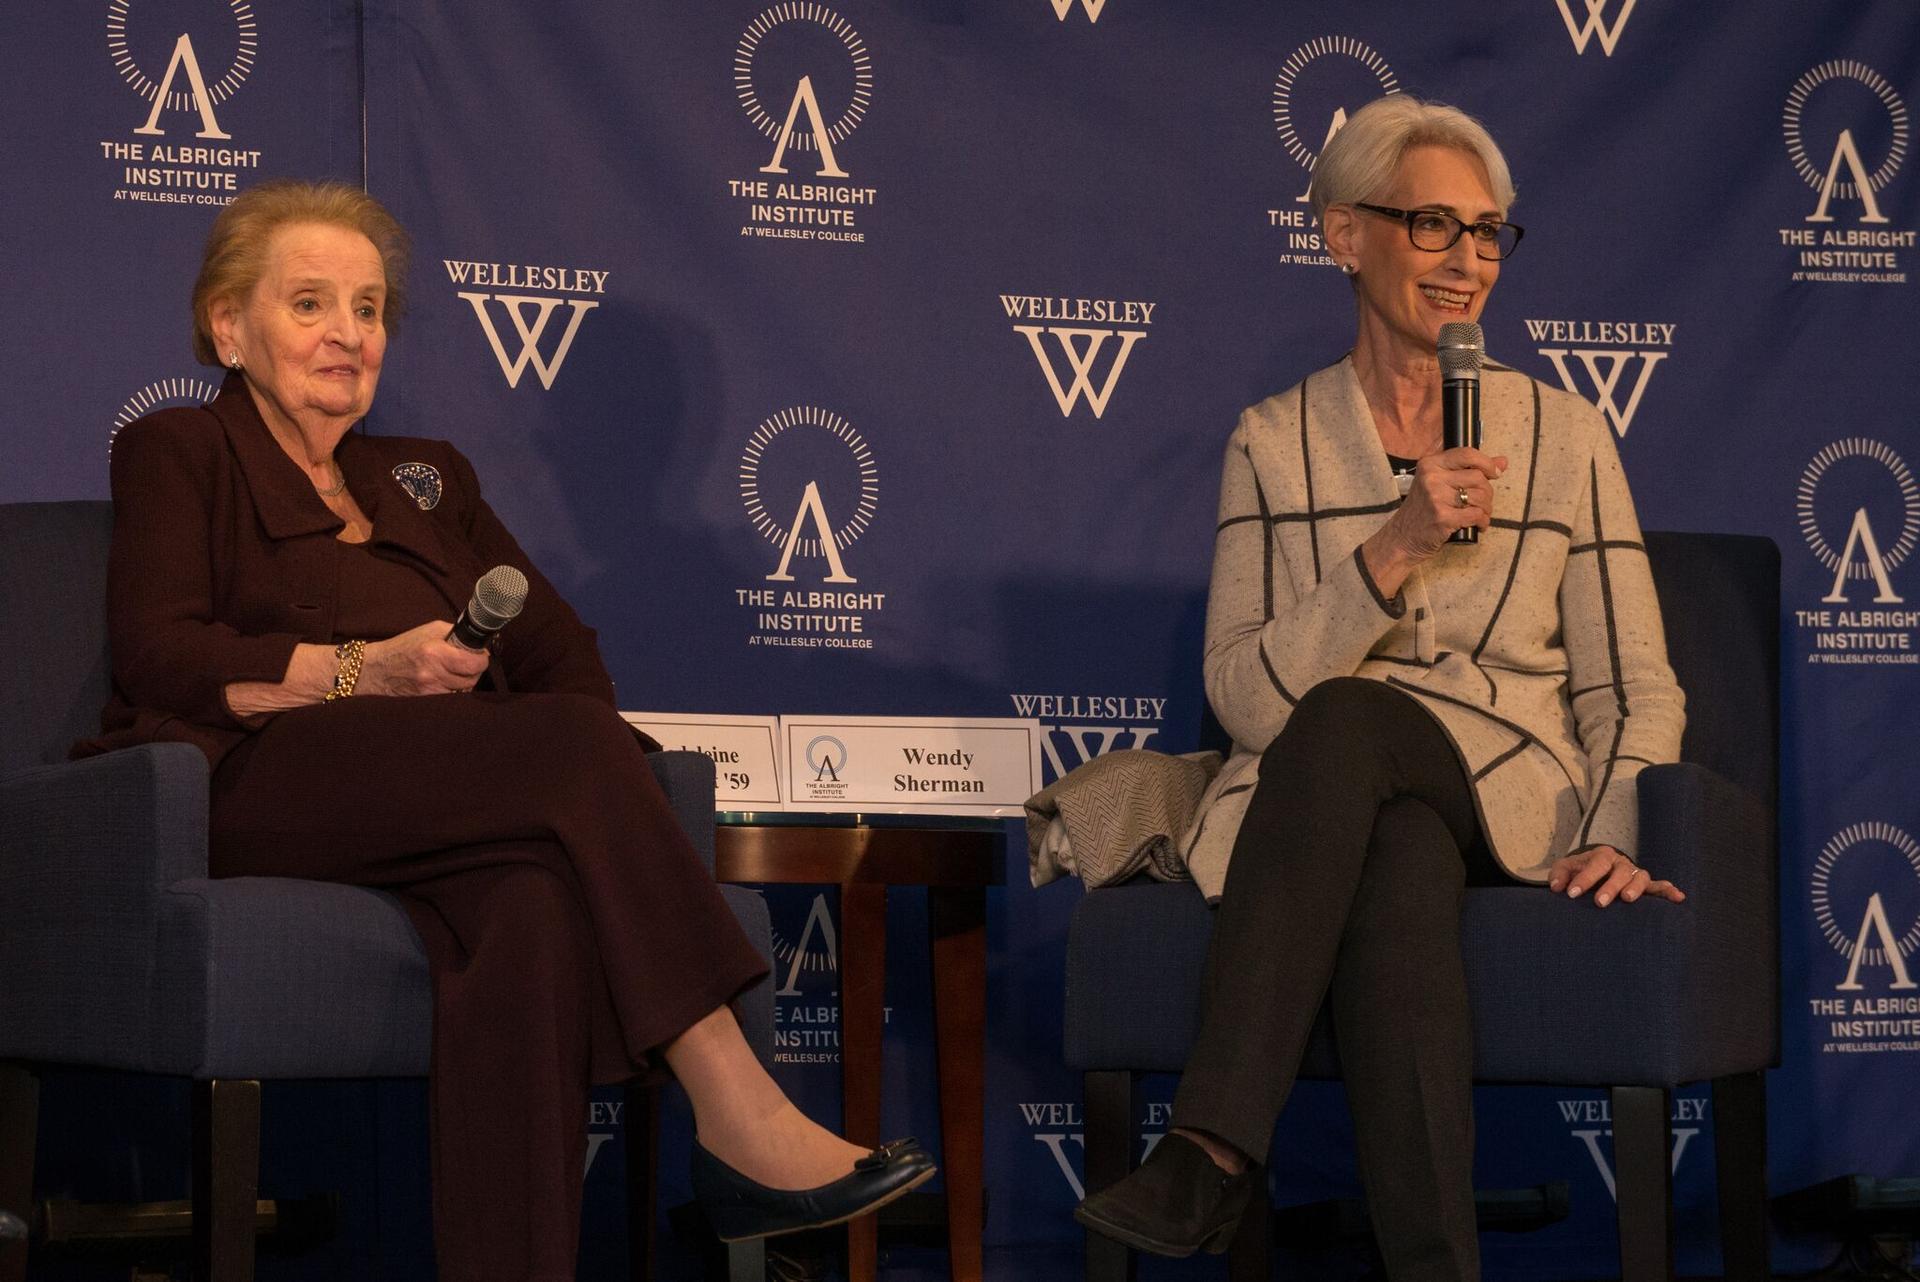 Former Secretary of State Madeleine Albright and Amb. Wendy Sherman speaking at Wellesley College. 